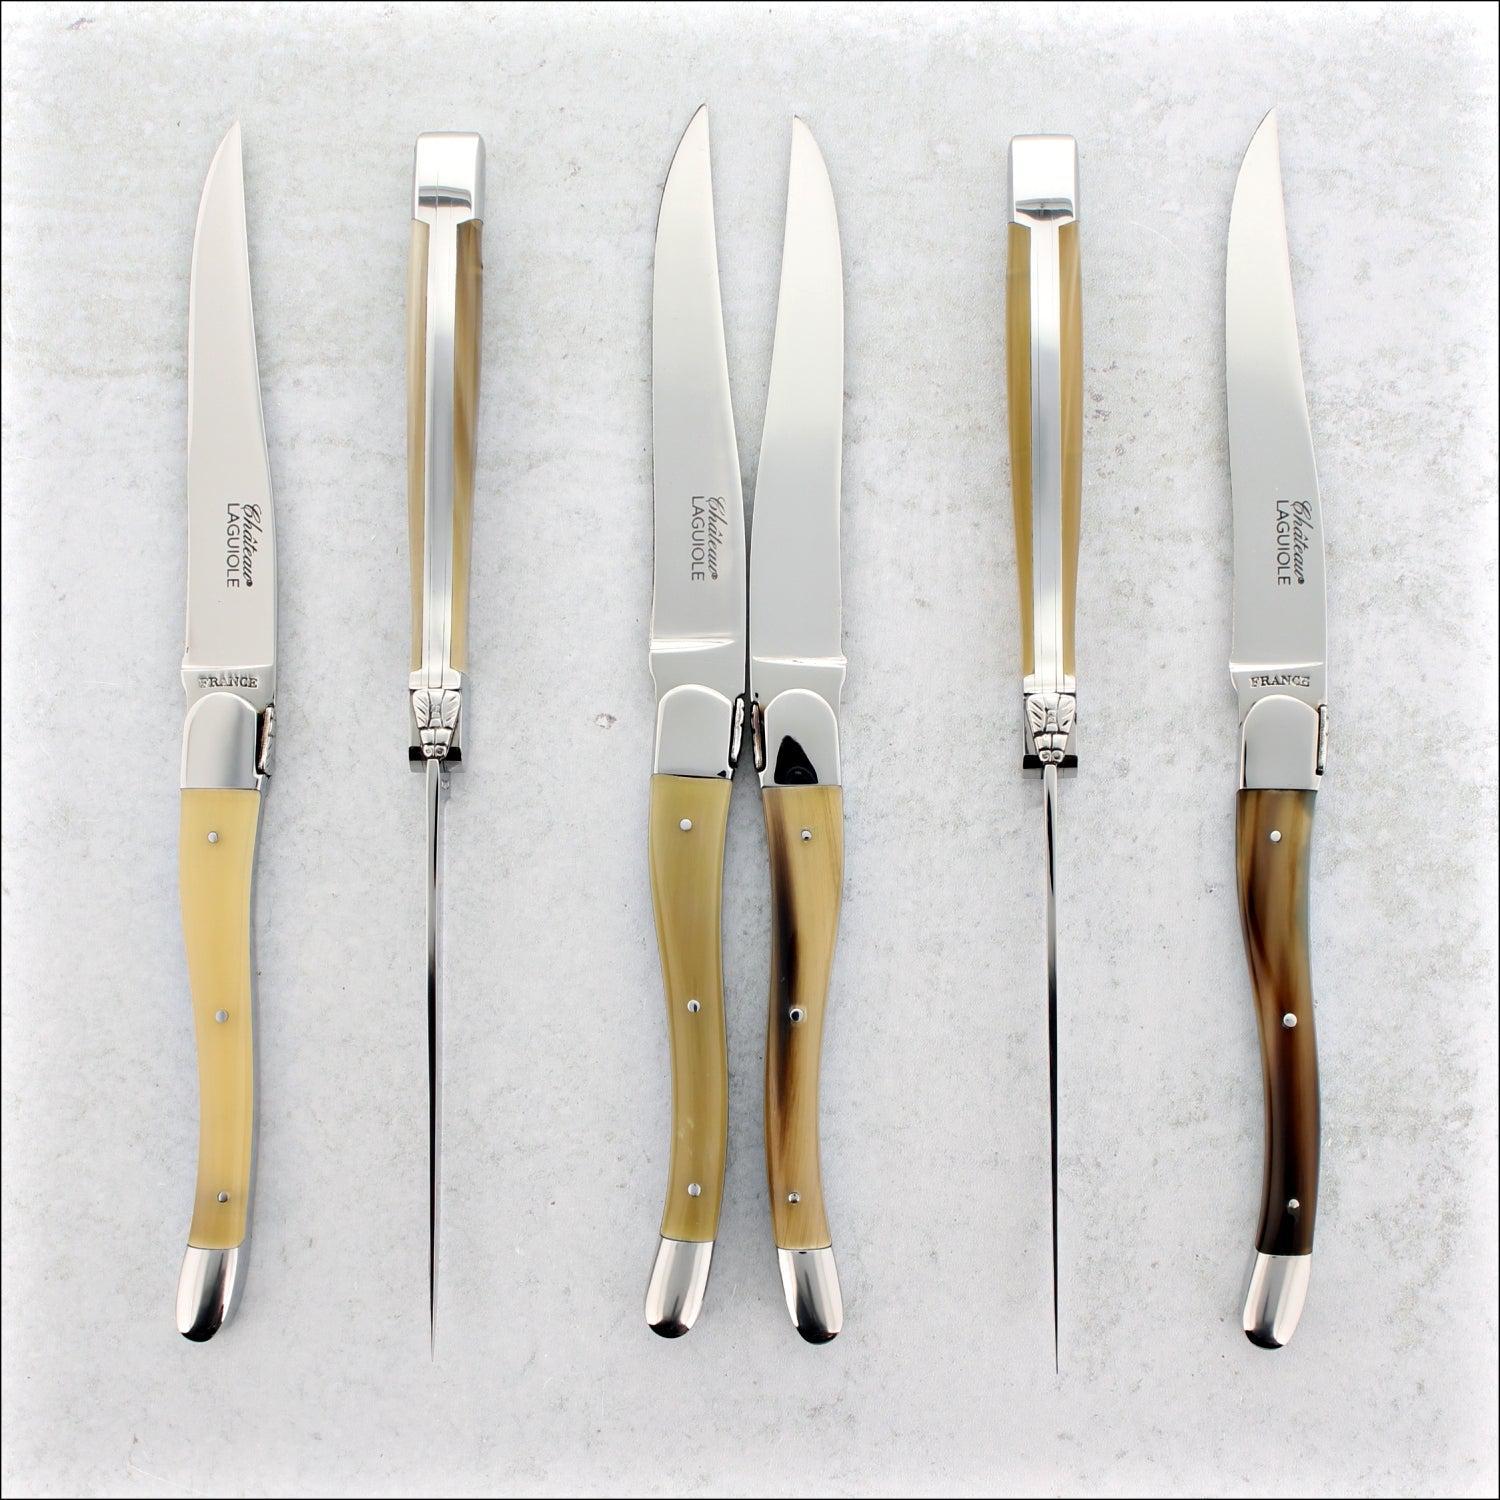 https://www.laguiole-imports.com/cdn/shop/files/Chateau-Laguiole-Signature-Steak-Knives-Horn-Tip-Shiny-Finish-Chateau-Laguioler-Made-in-France-2.jpg?v=1704104794